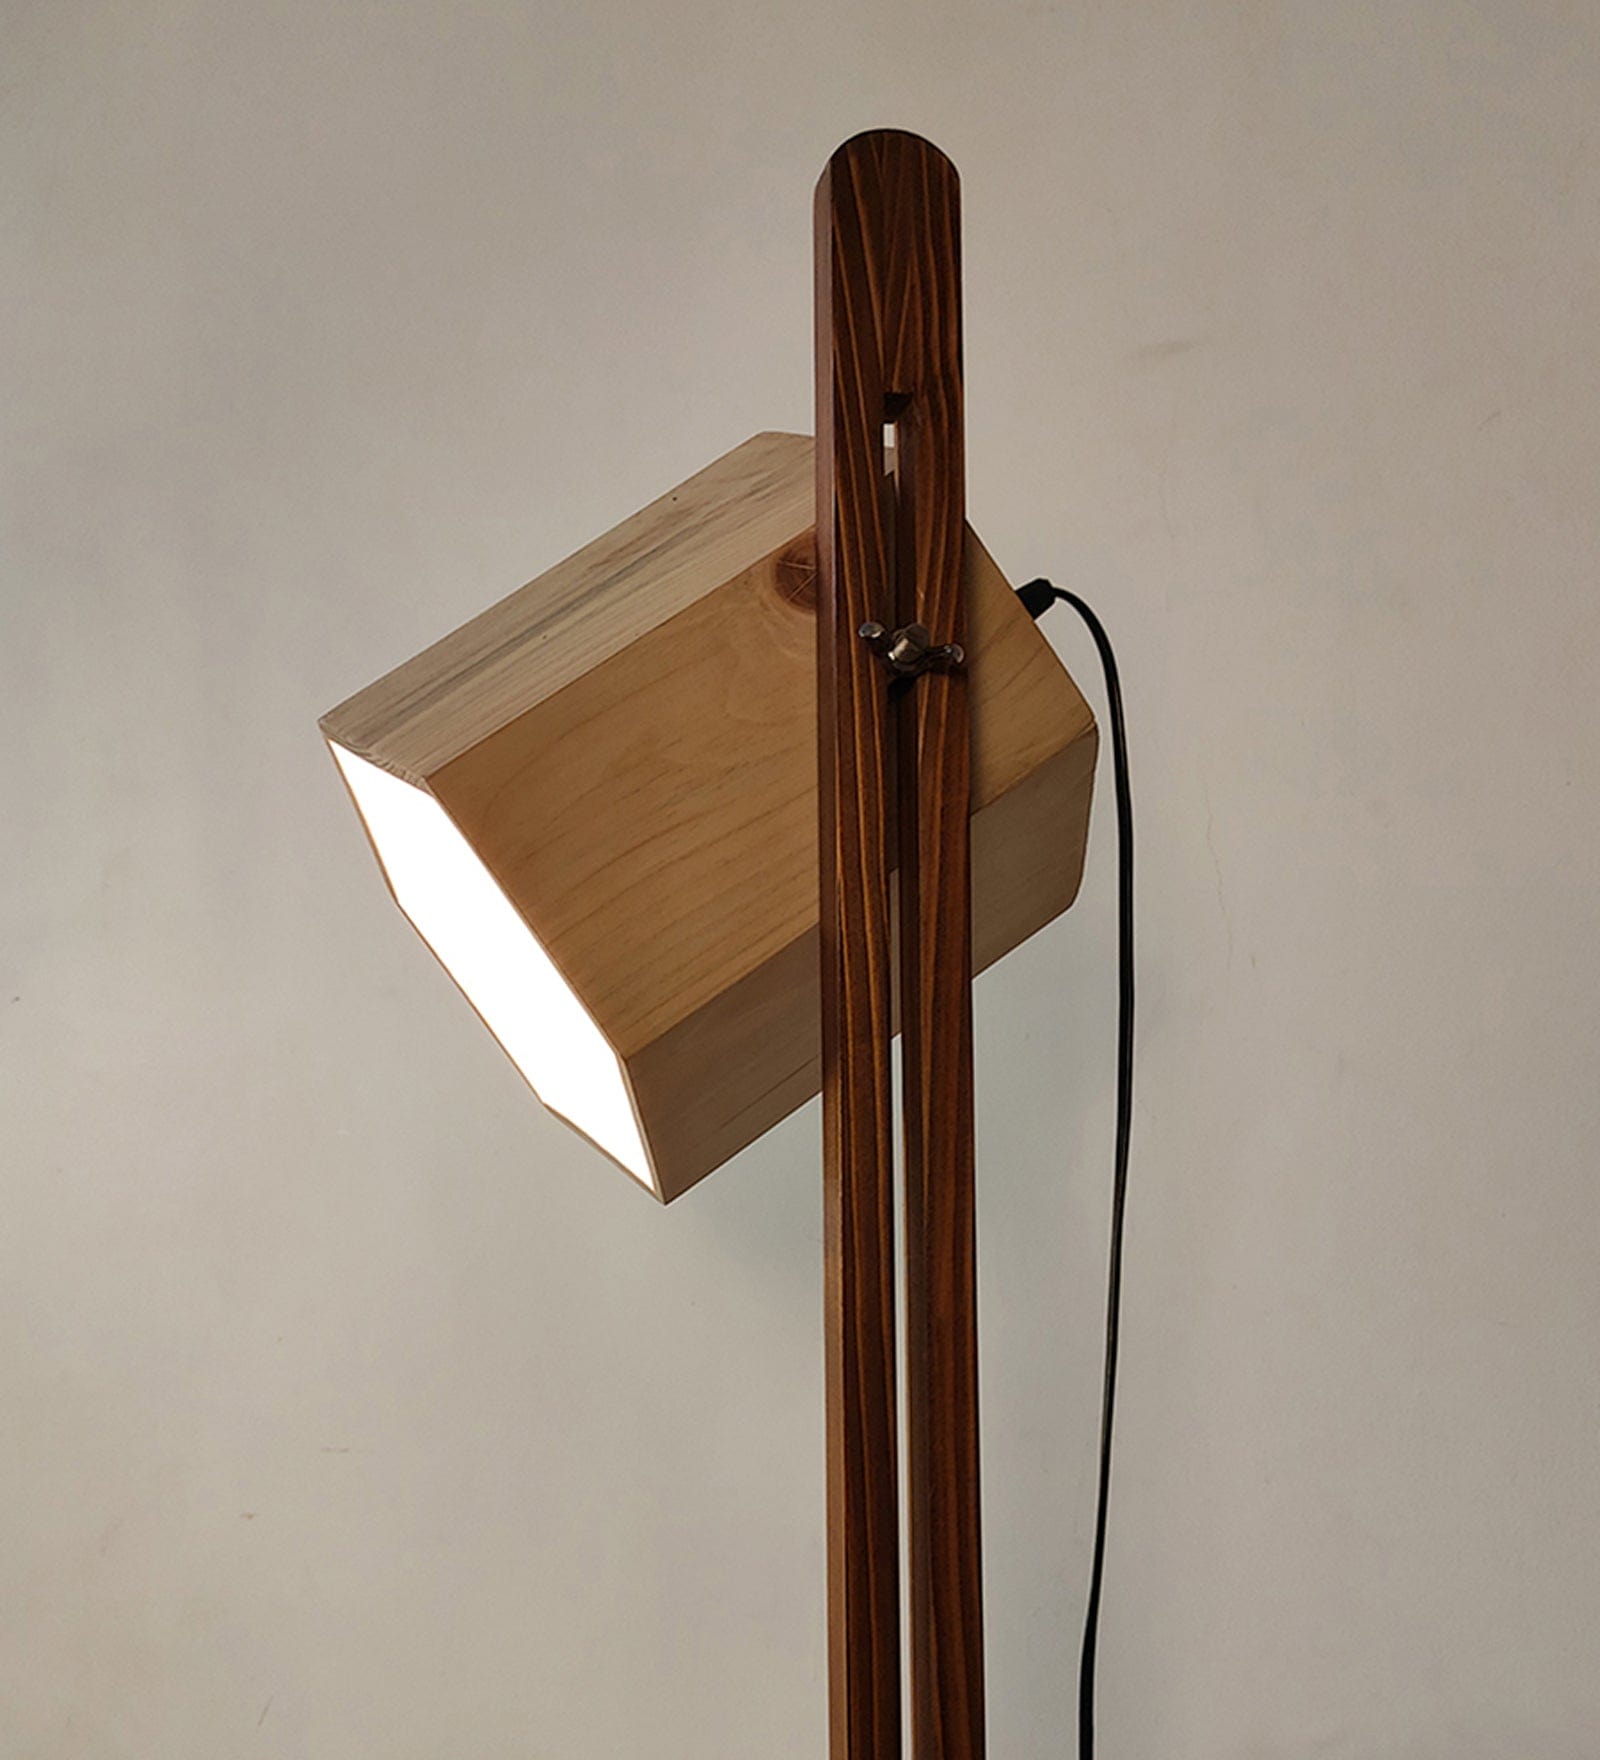 HexSpot Wooden Floor Lamp with Beige  Base and Red Wooden Lampshade (BULB NOT INCLUDED)